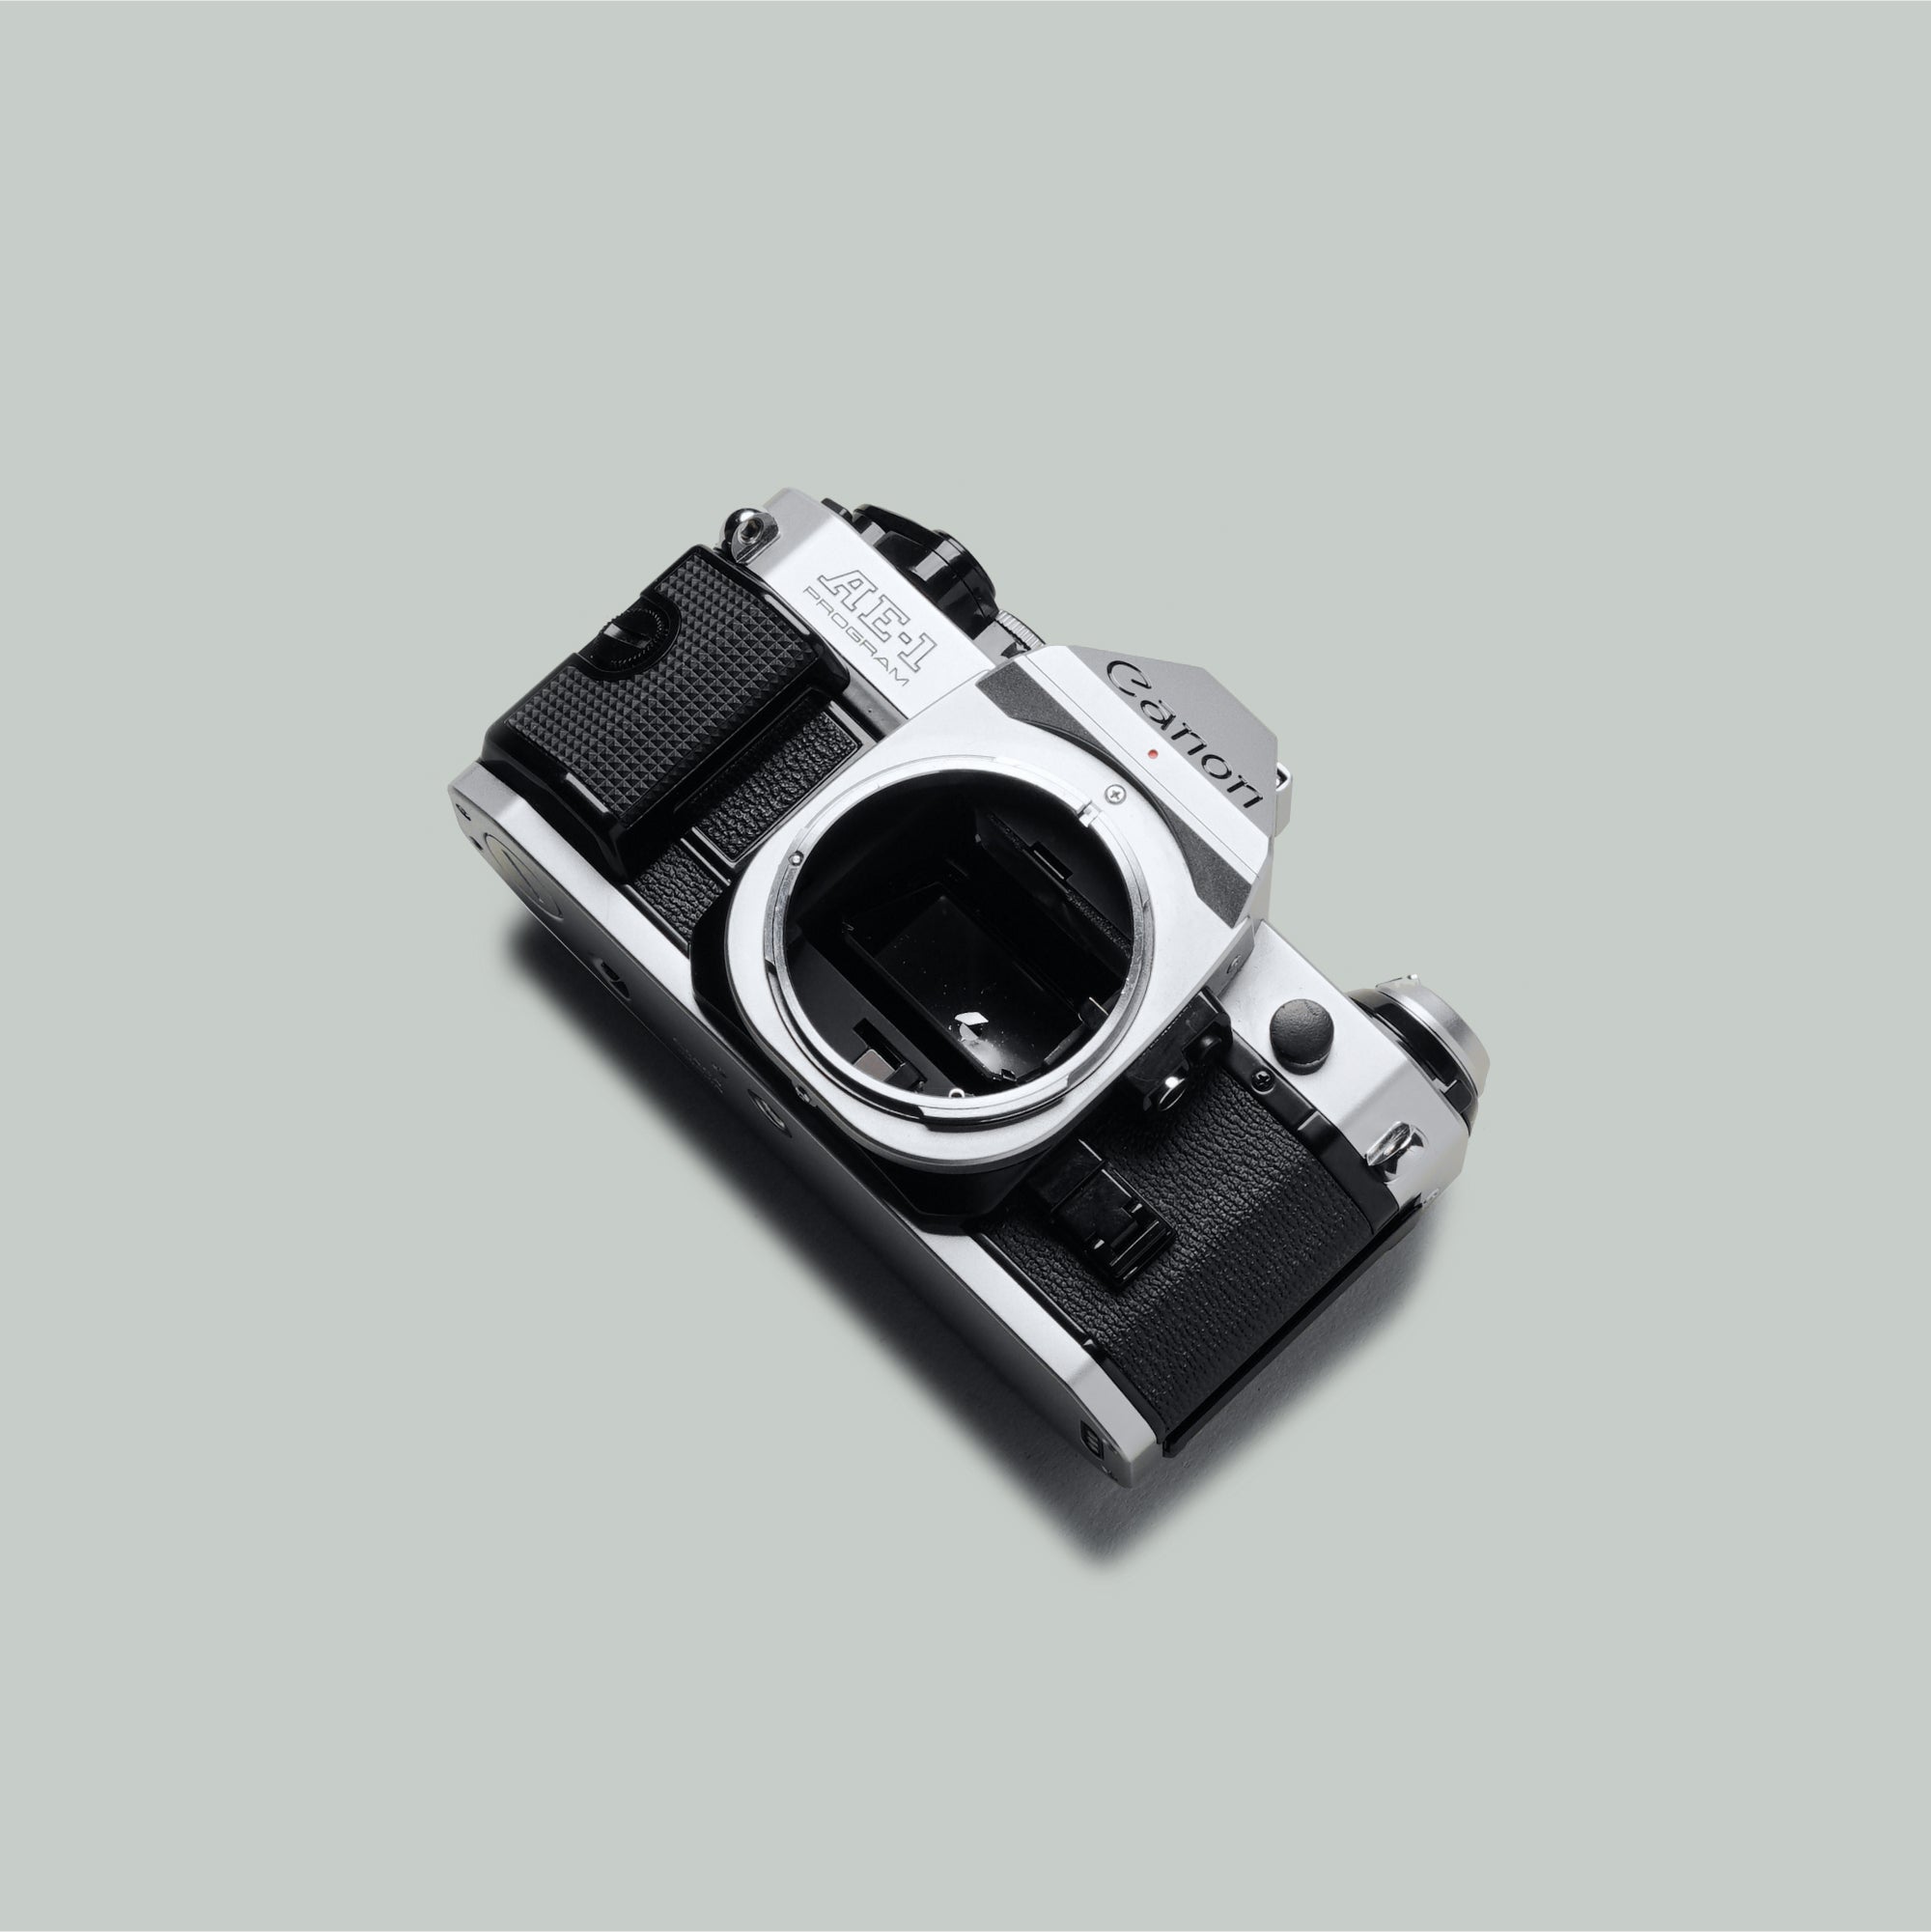 Buy Canon AE-1 Program now at Analogue Amsterdam